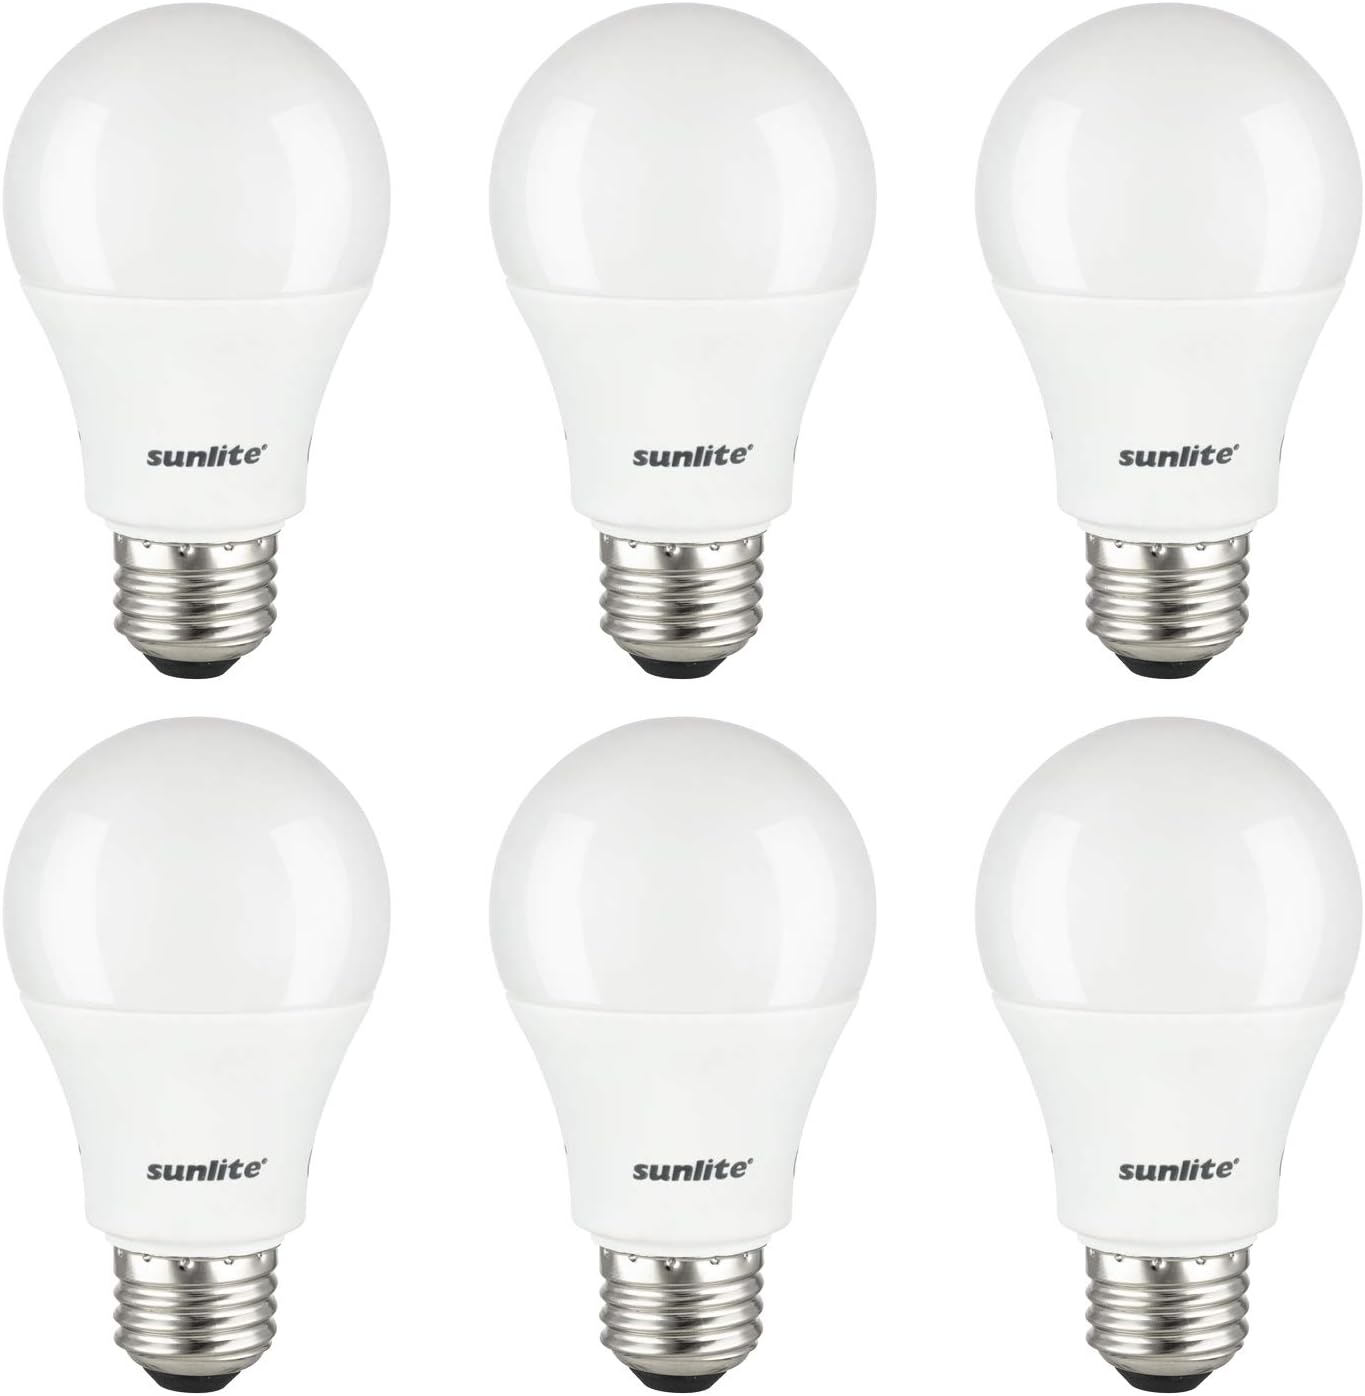 Sunlite 80939-SU LED A19 Light Bulbs, 14 Watts (100W Equivalent), 1500 Lumens, Medium Base (E26), Non-Dimmable, UL Listed, 65K - Daylight Pack of 6